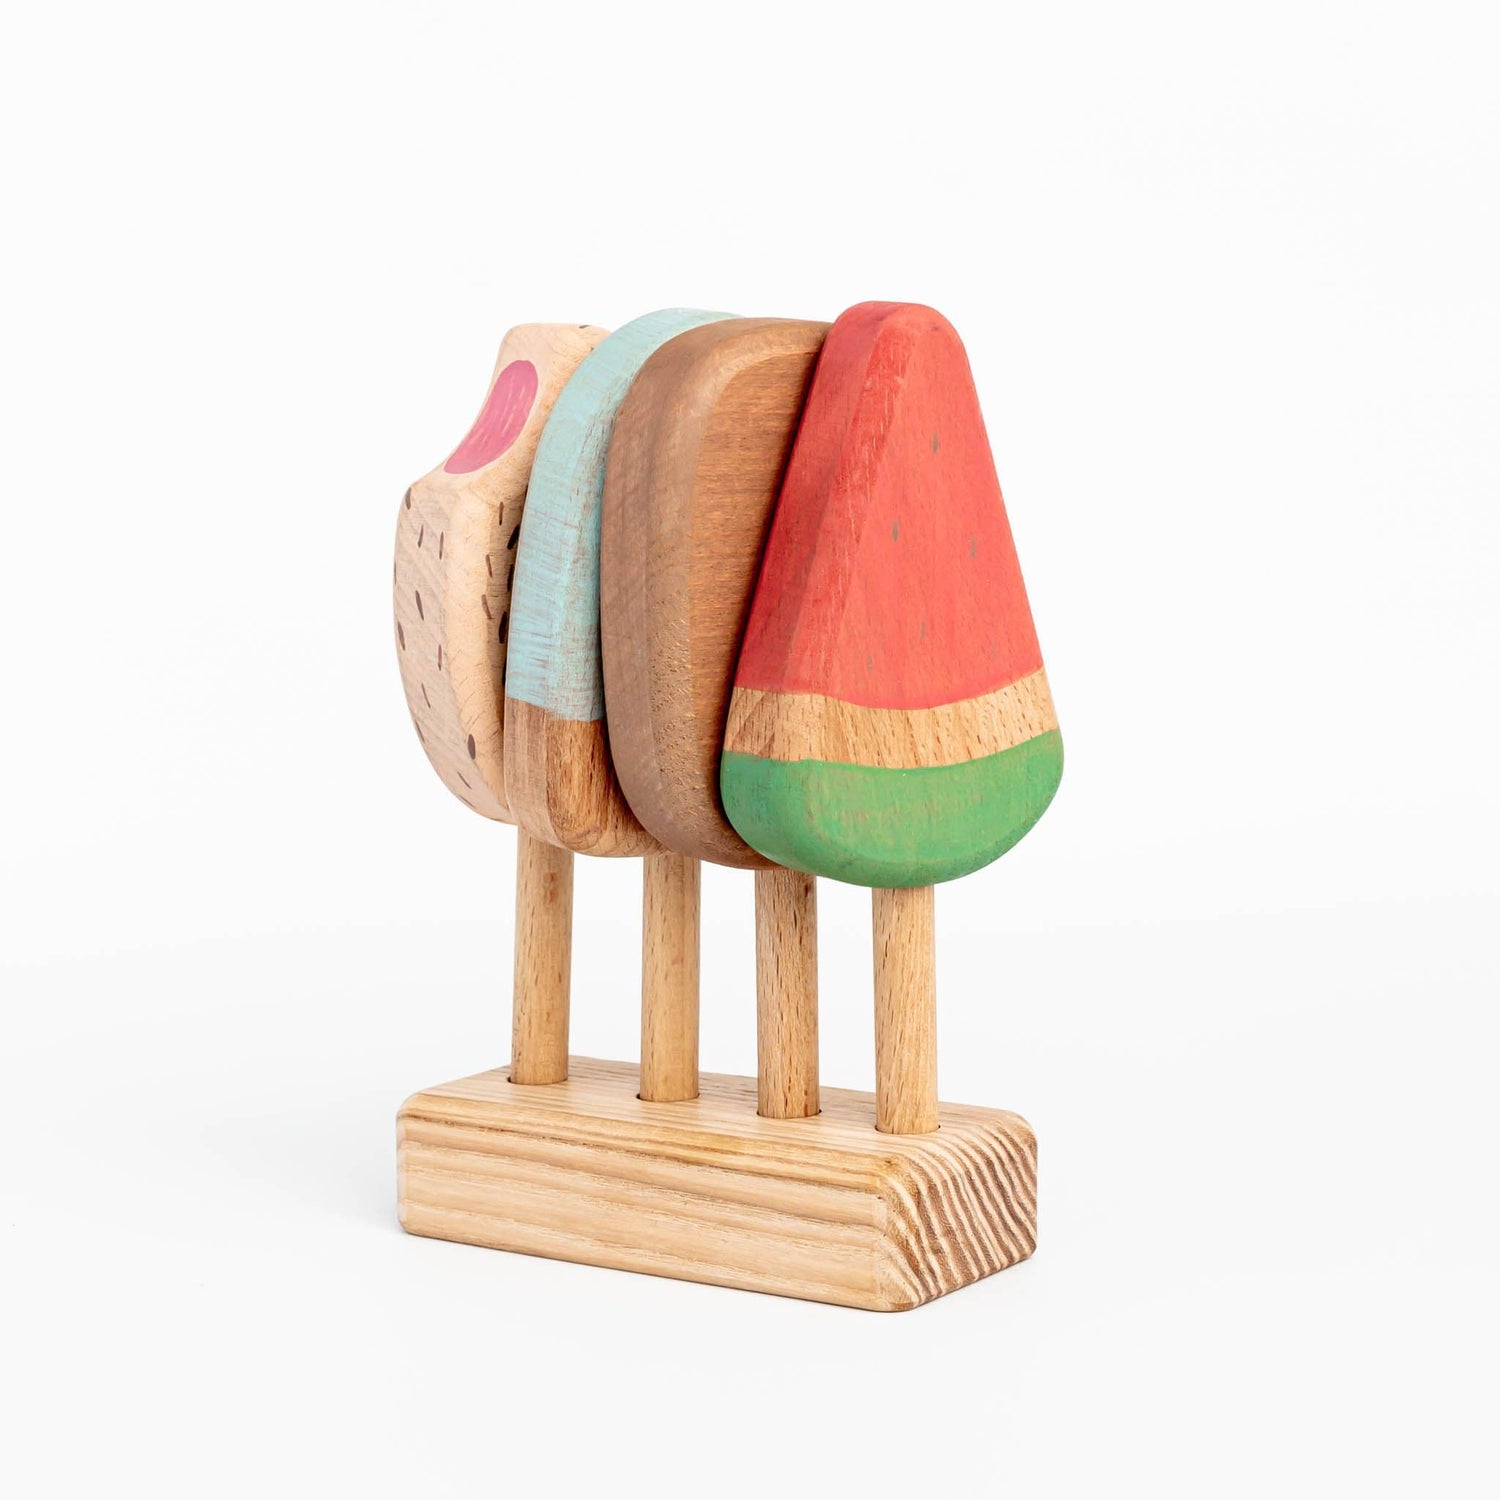 Wooden Food Toys